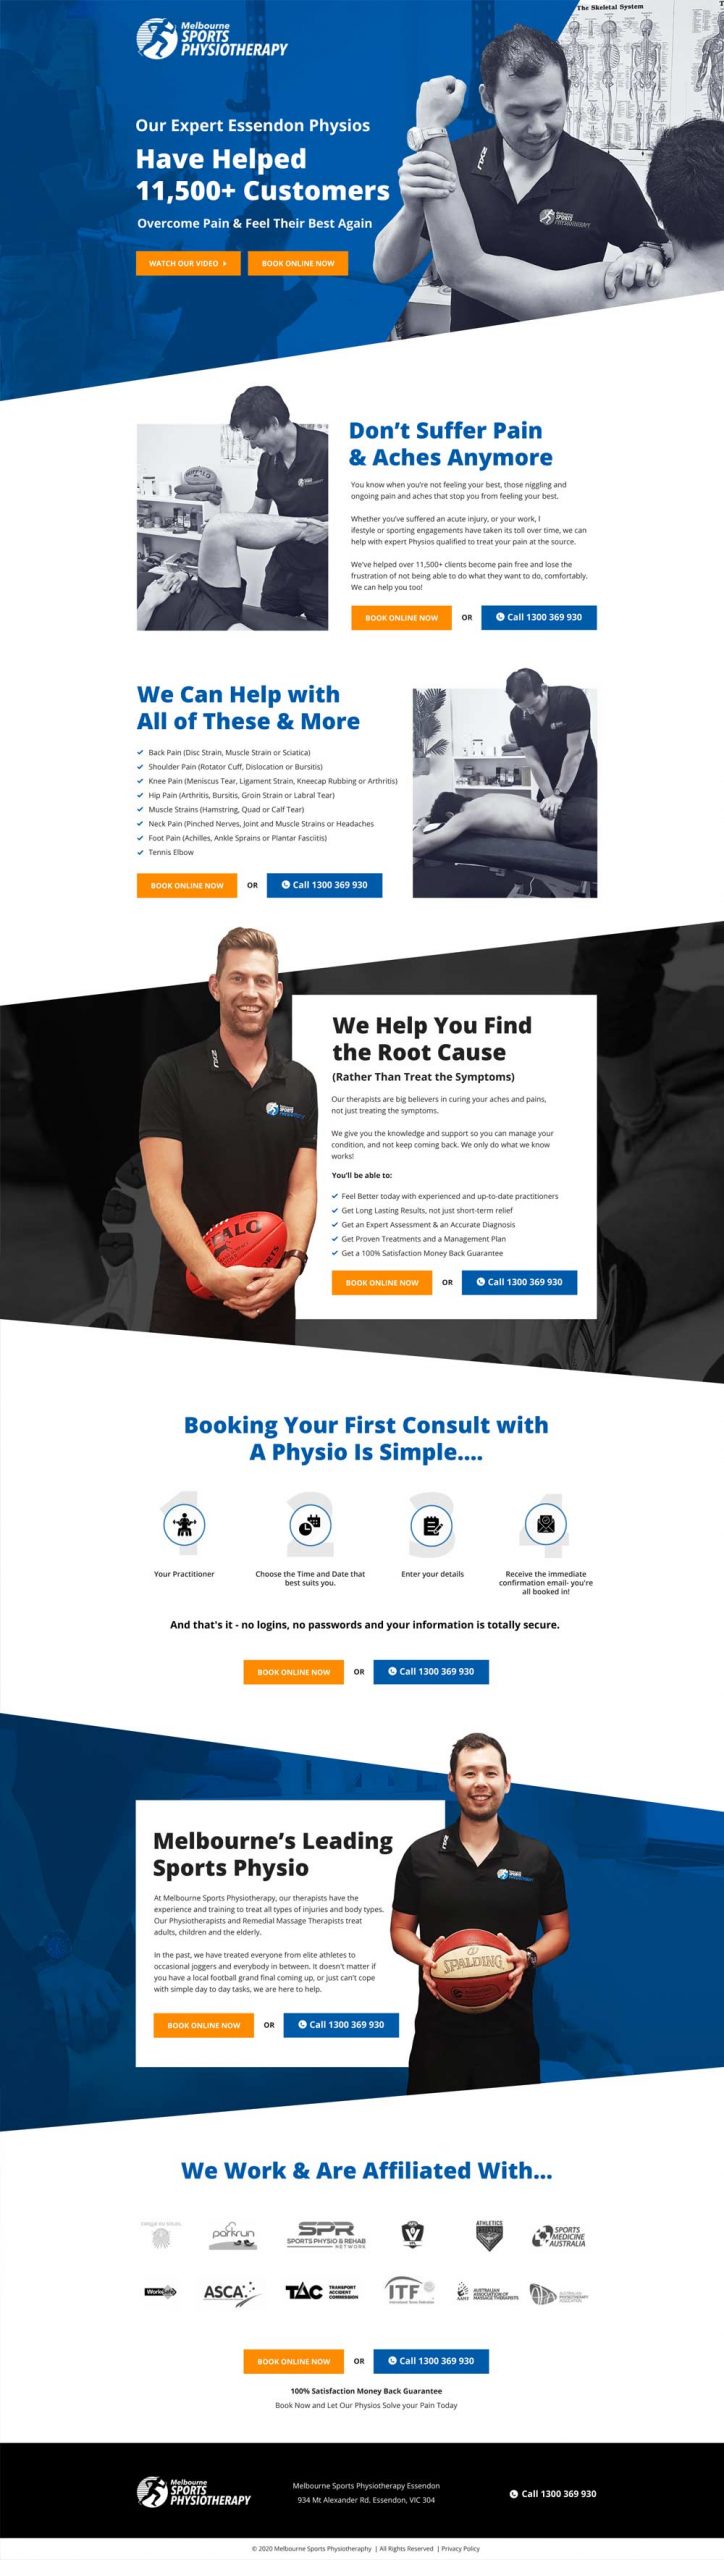 melbourne-sports-physio